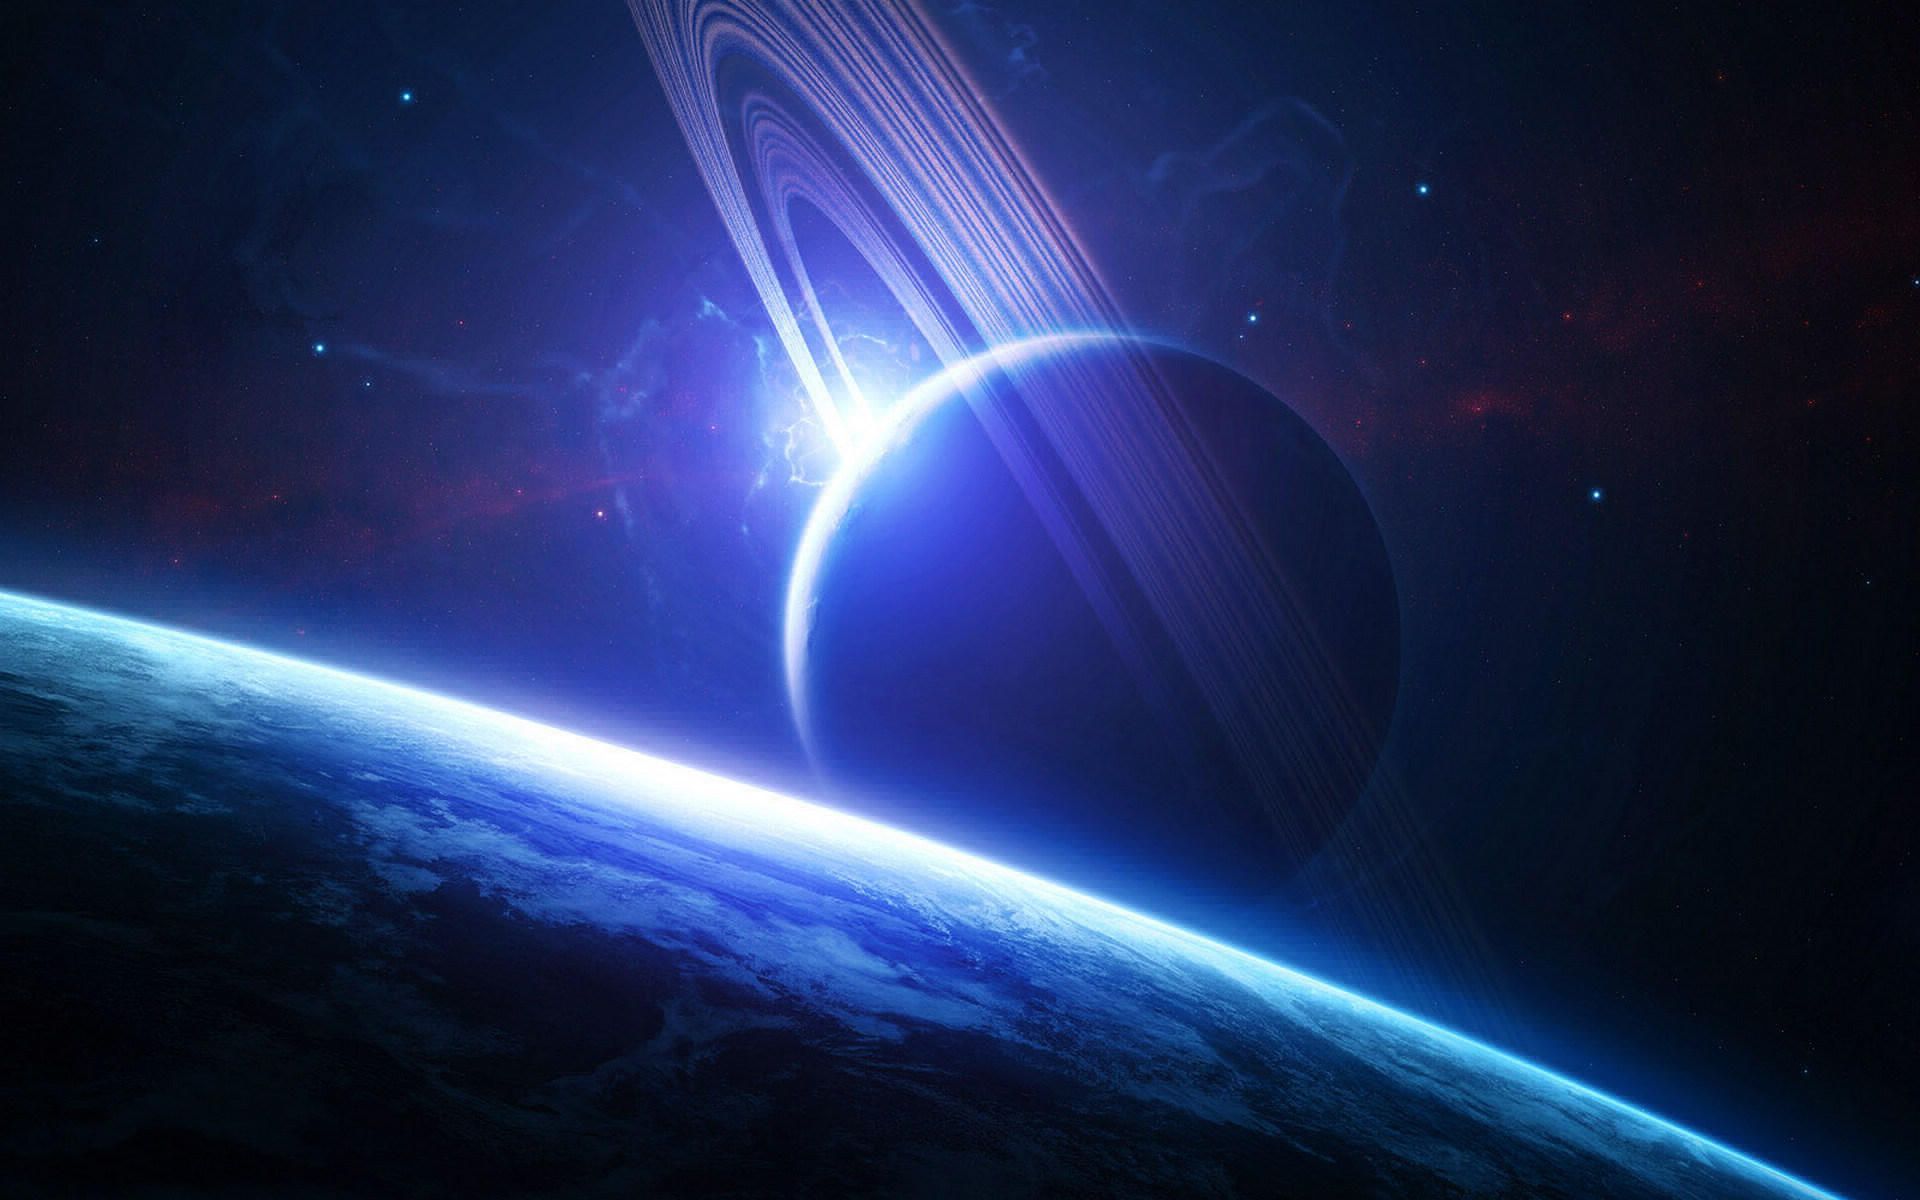 Hd Wallpapers Space Universe - Pics about space